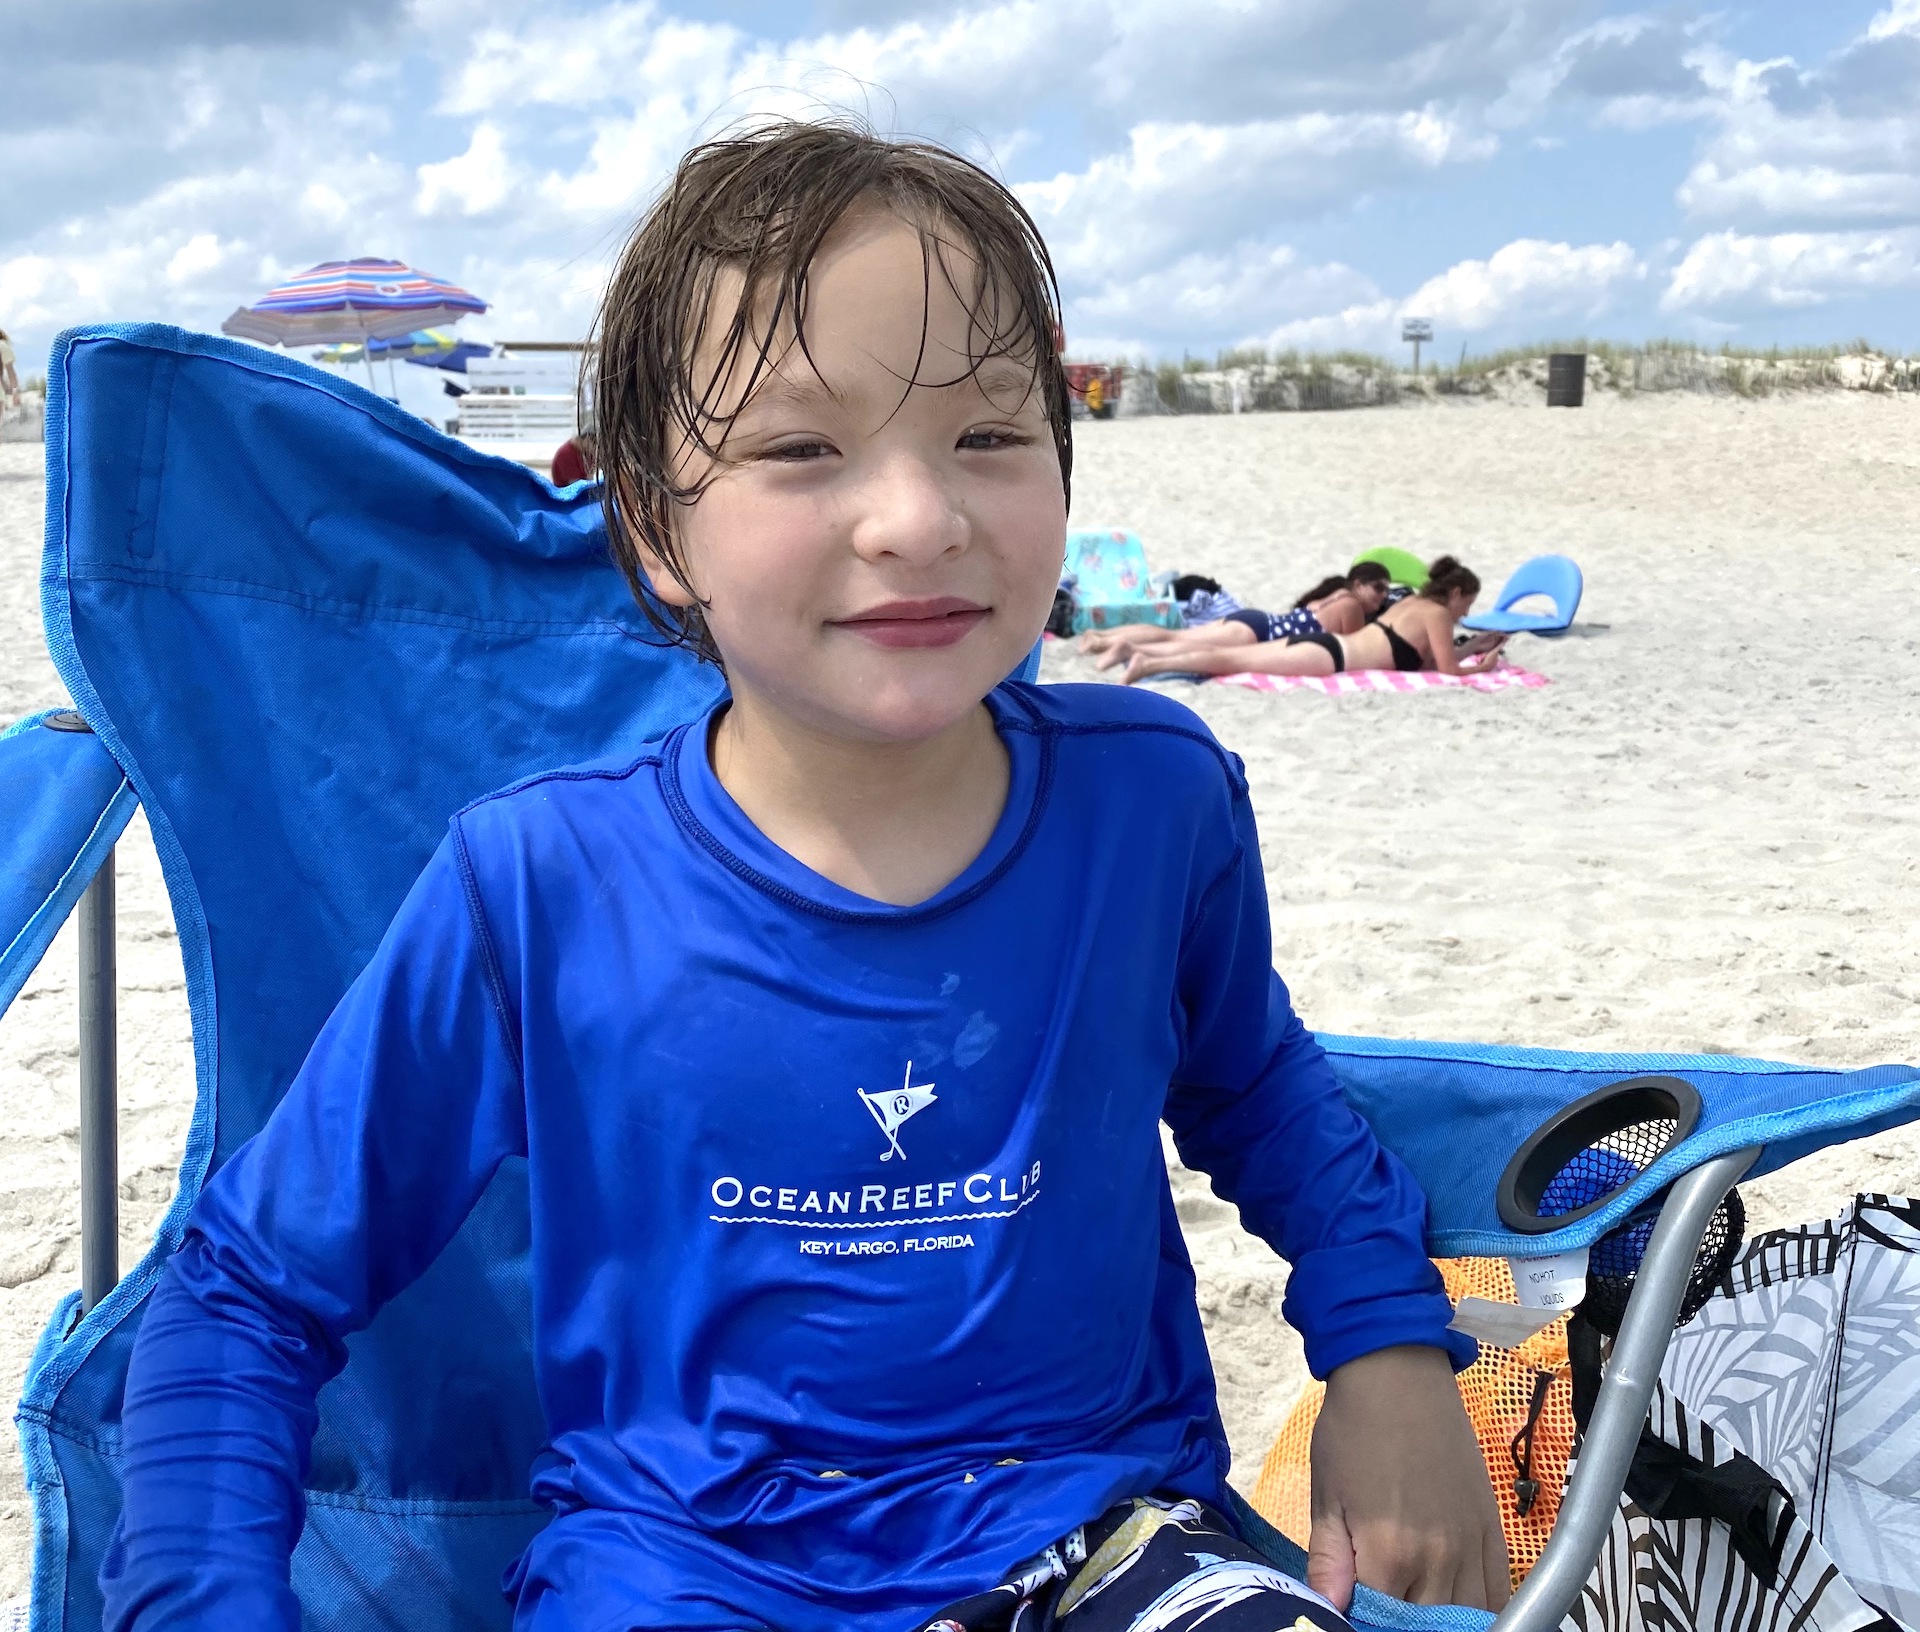 A young boy wearing a swim shirt and swim suit sits in folding chair on a beach.